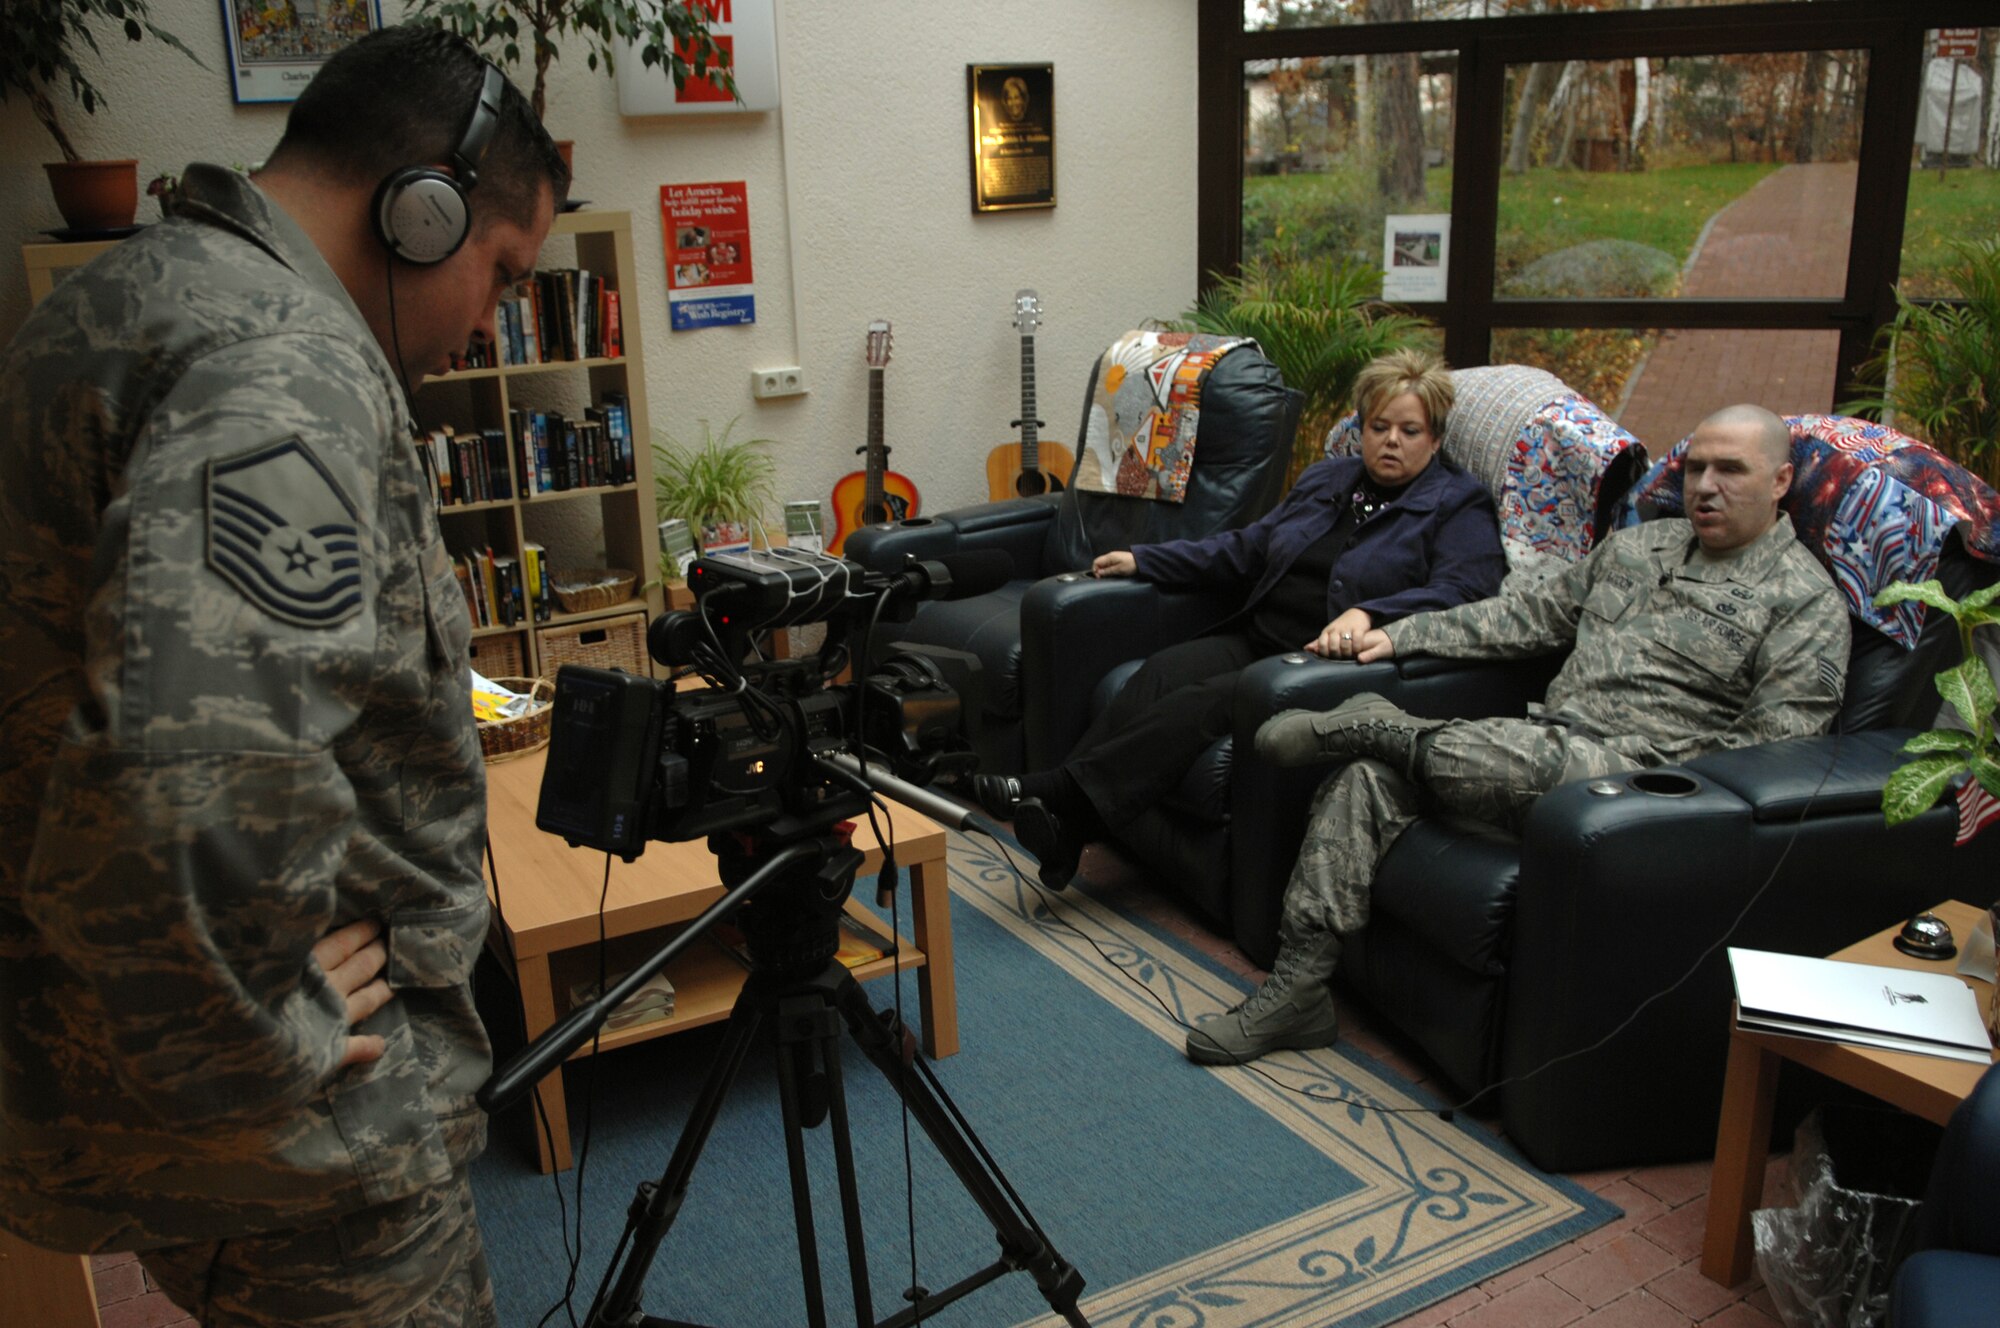 Master Sgt. Christopher Stone, Air Force News video broadcaster, shoots a commercial of Staff Sgt. Matthew Slaydon and his wife, Annette, discussing the importance of completing pre-deployment paperwork prior to deployment, Ramstein Air Base, Germany, Nov. 21, 2008. Sgt. Slaydon was severely injured in Iraq 13 months ago during a deployment there as an explosive ordinance disposal technician and is visiting Ramstein as part of a morale tour, following his recovery. (U.S. Air Force photo by Airman 1st Class Tony R. Ritter)